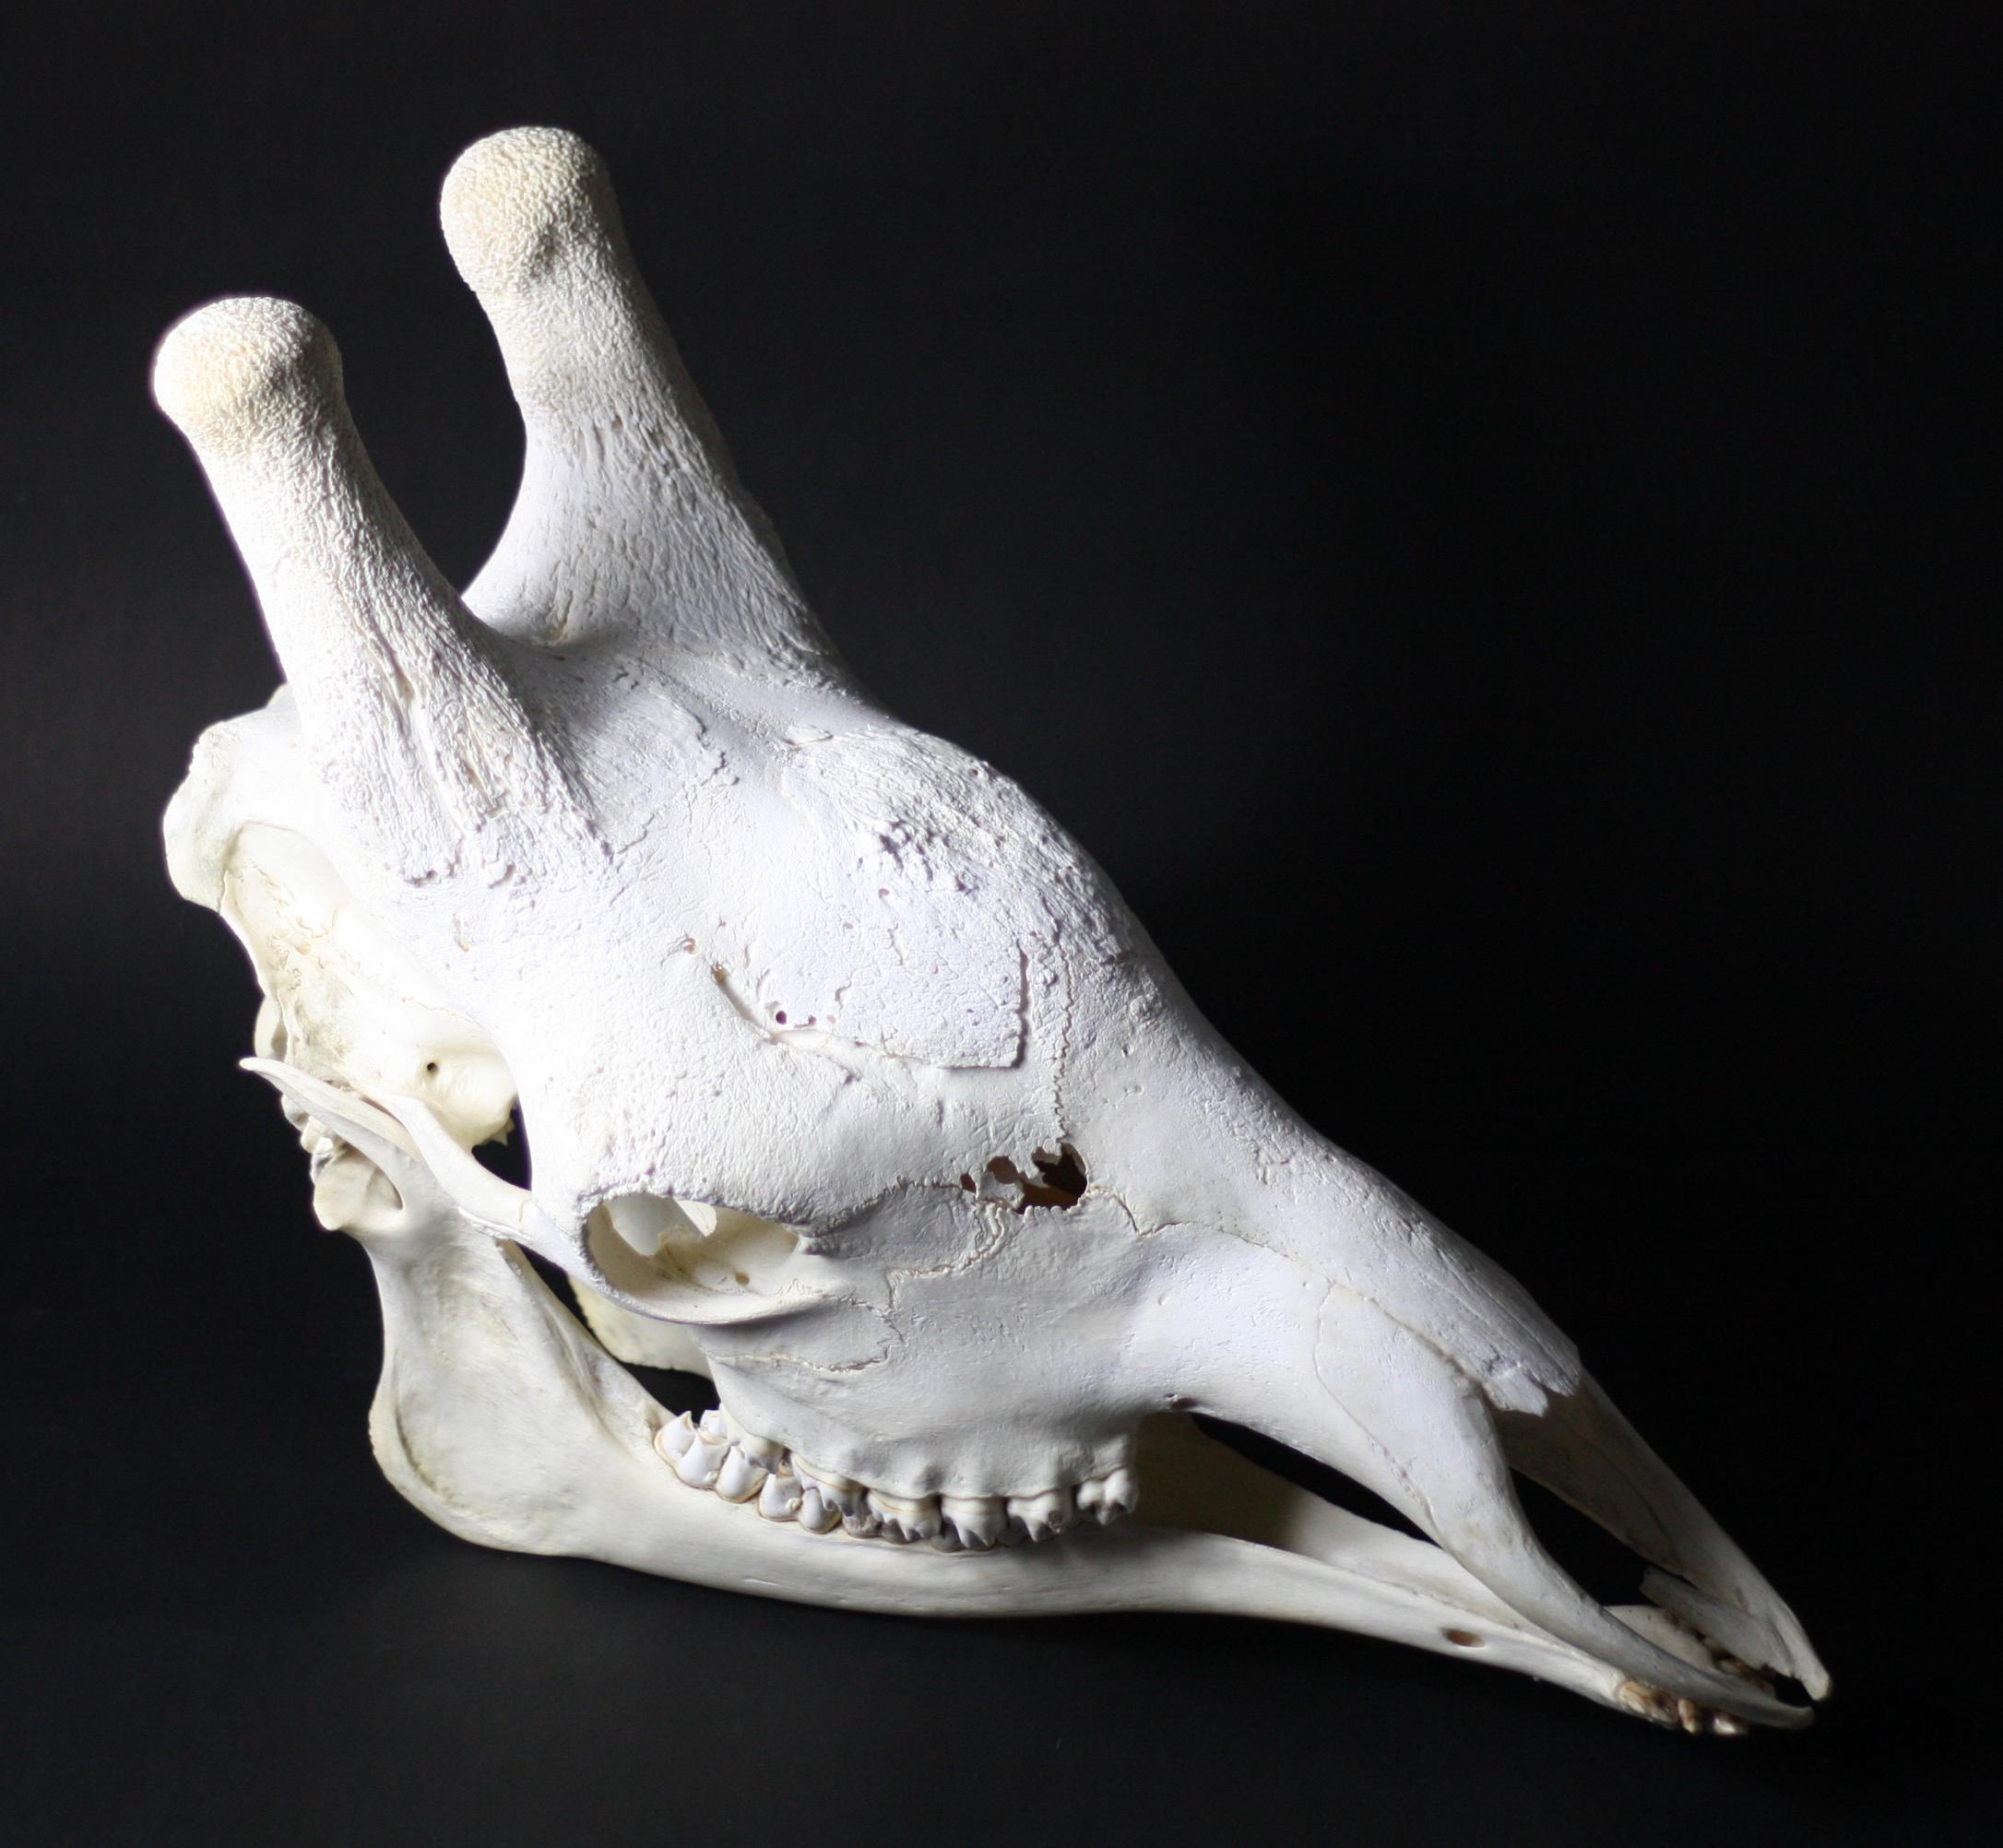 A very large and very rare adult African Giraffe skull.

An extremely imposing item and it's unique macabre shape makes for an impressive centre piece.

The upper skull rests on the lower skull and can be separated if required.